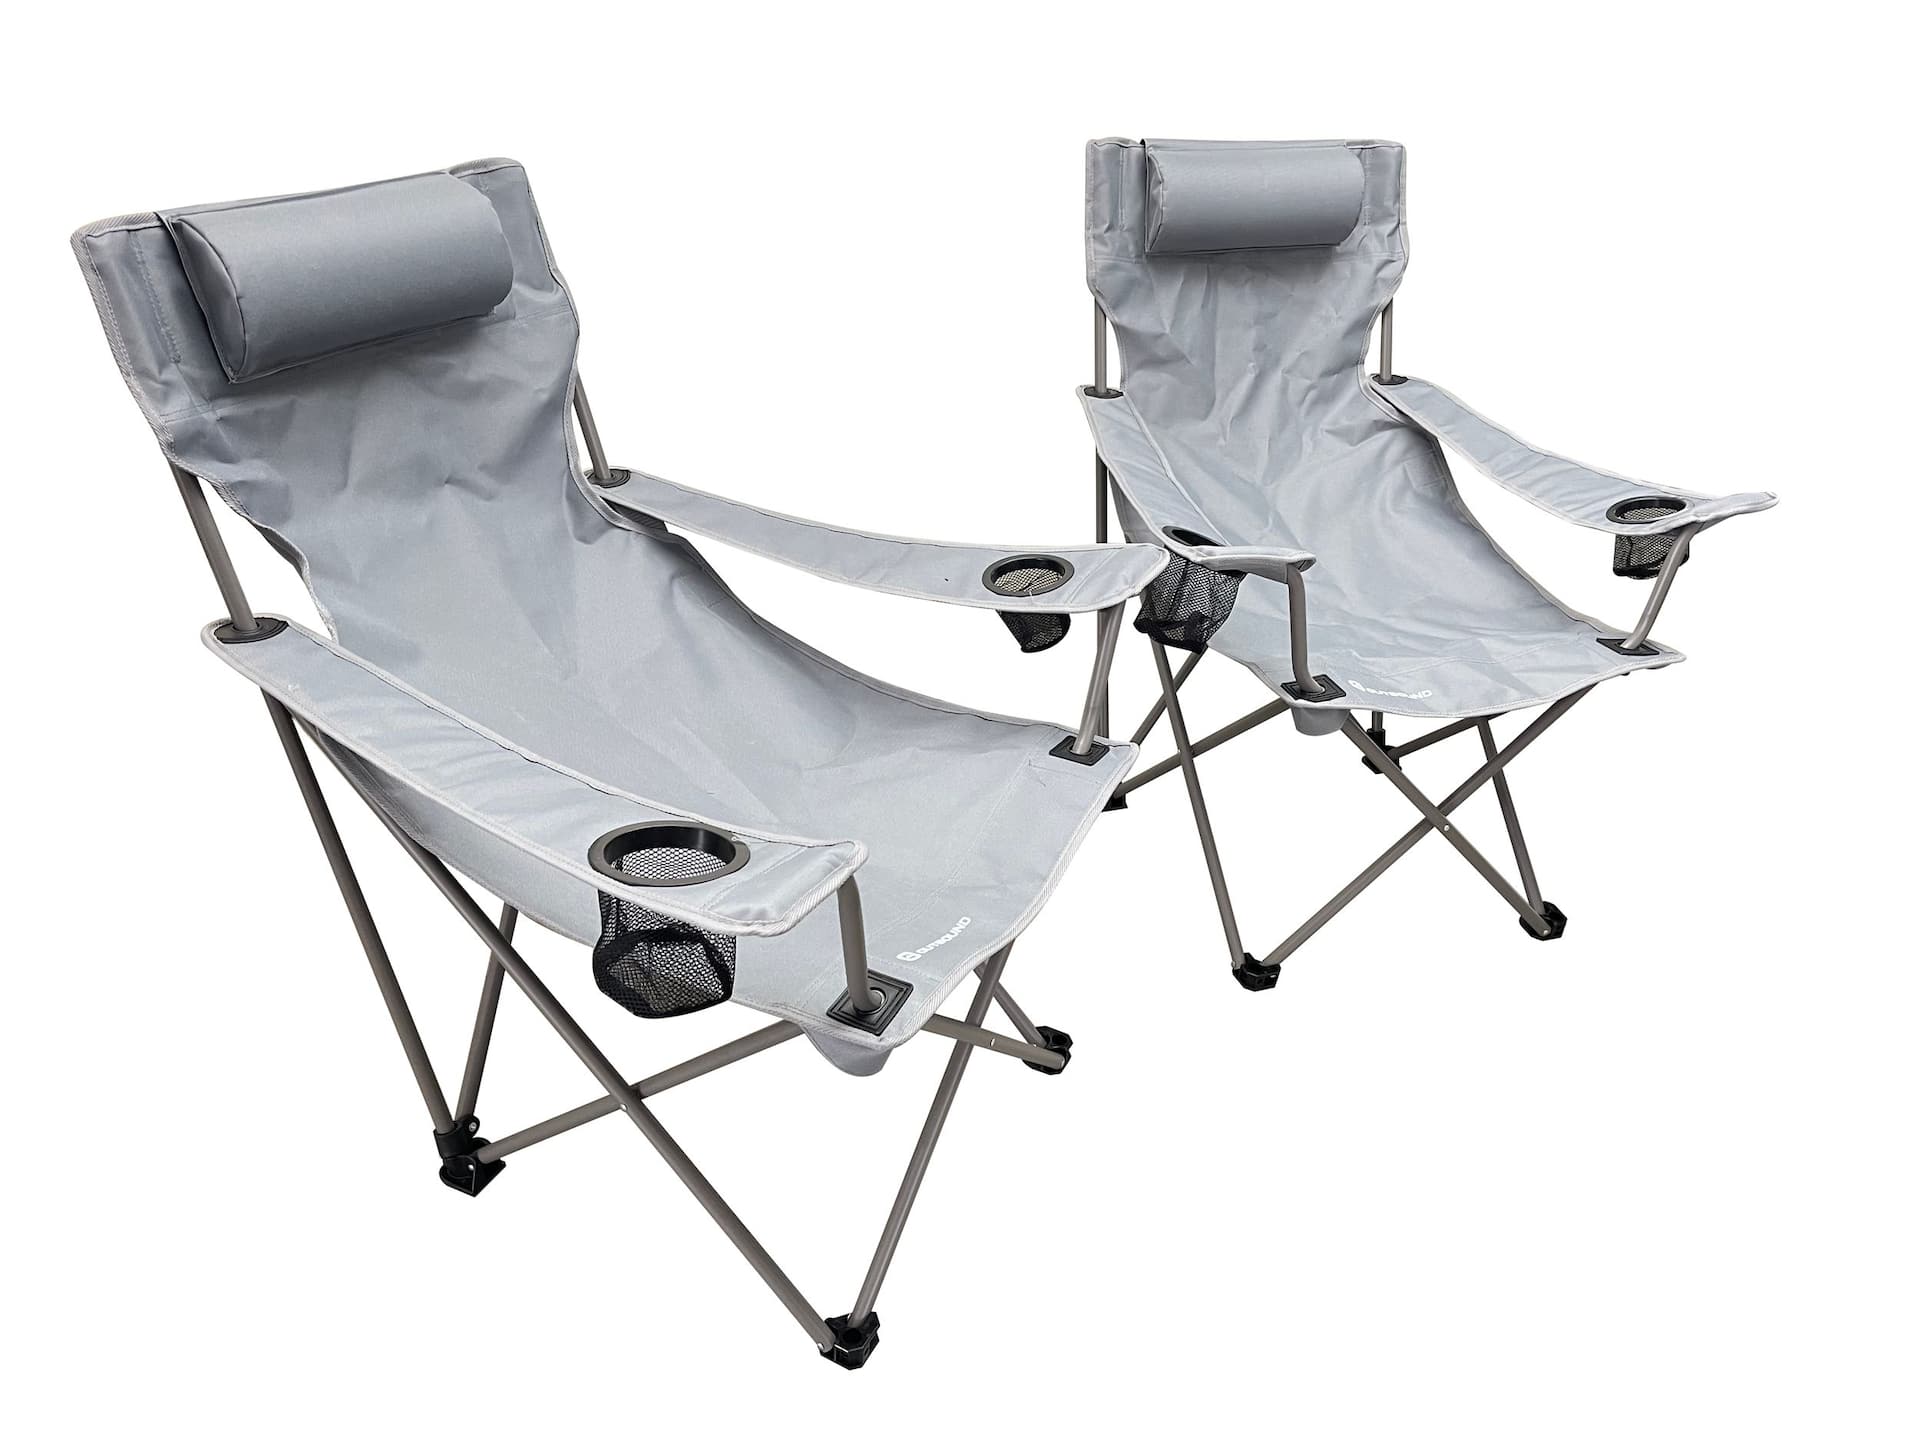 https://media-www.canadiantire.ca/product/playing/camping/camping-furniture/3999383/outbound-2pc-quad-fold-chair-combo-604ae644-610b-459b-8c4b-b354932e145a-jpgrendition.jpg